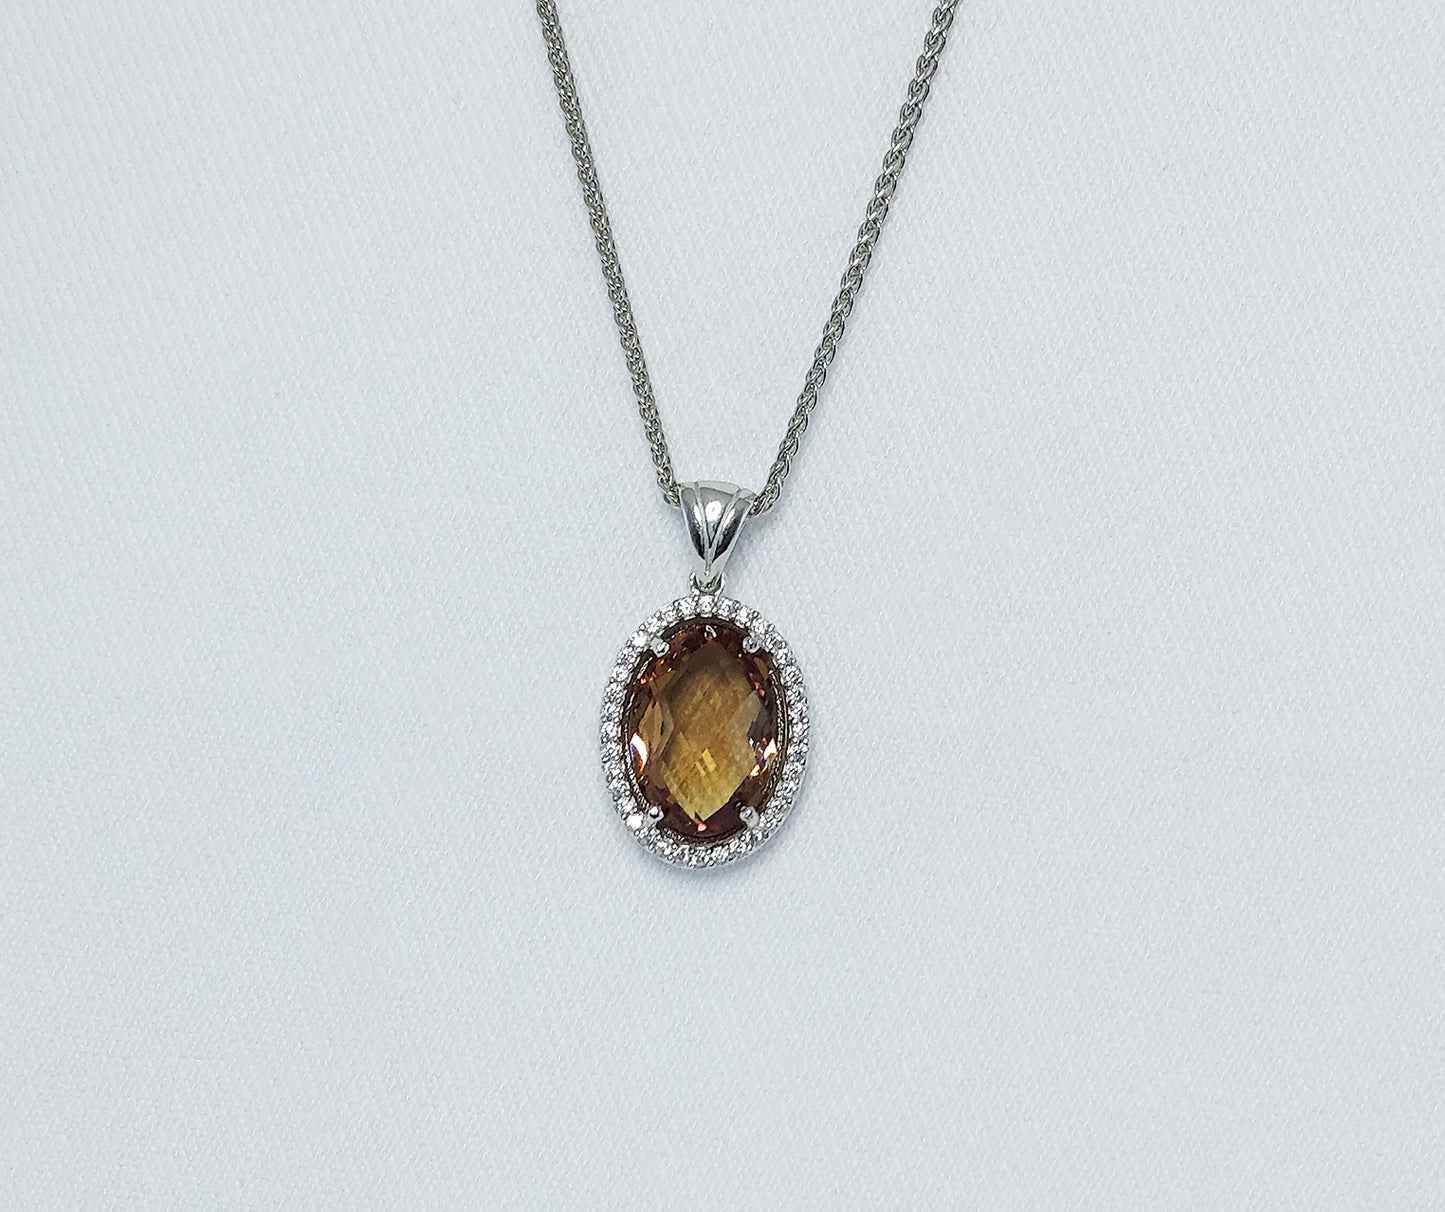 Sterling Silver Zultanite Pendant with Cubic Zirconias